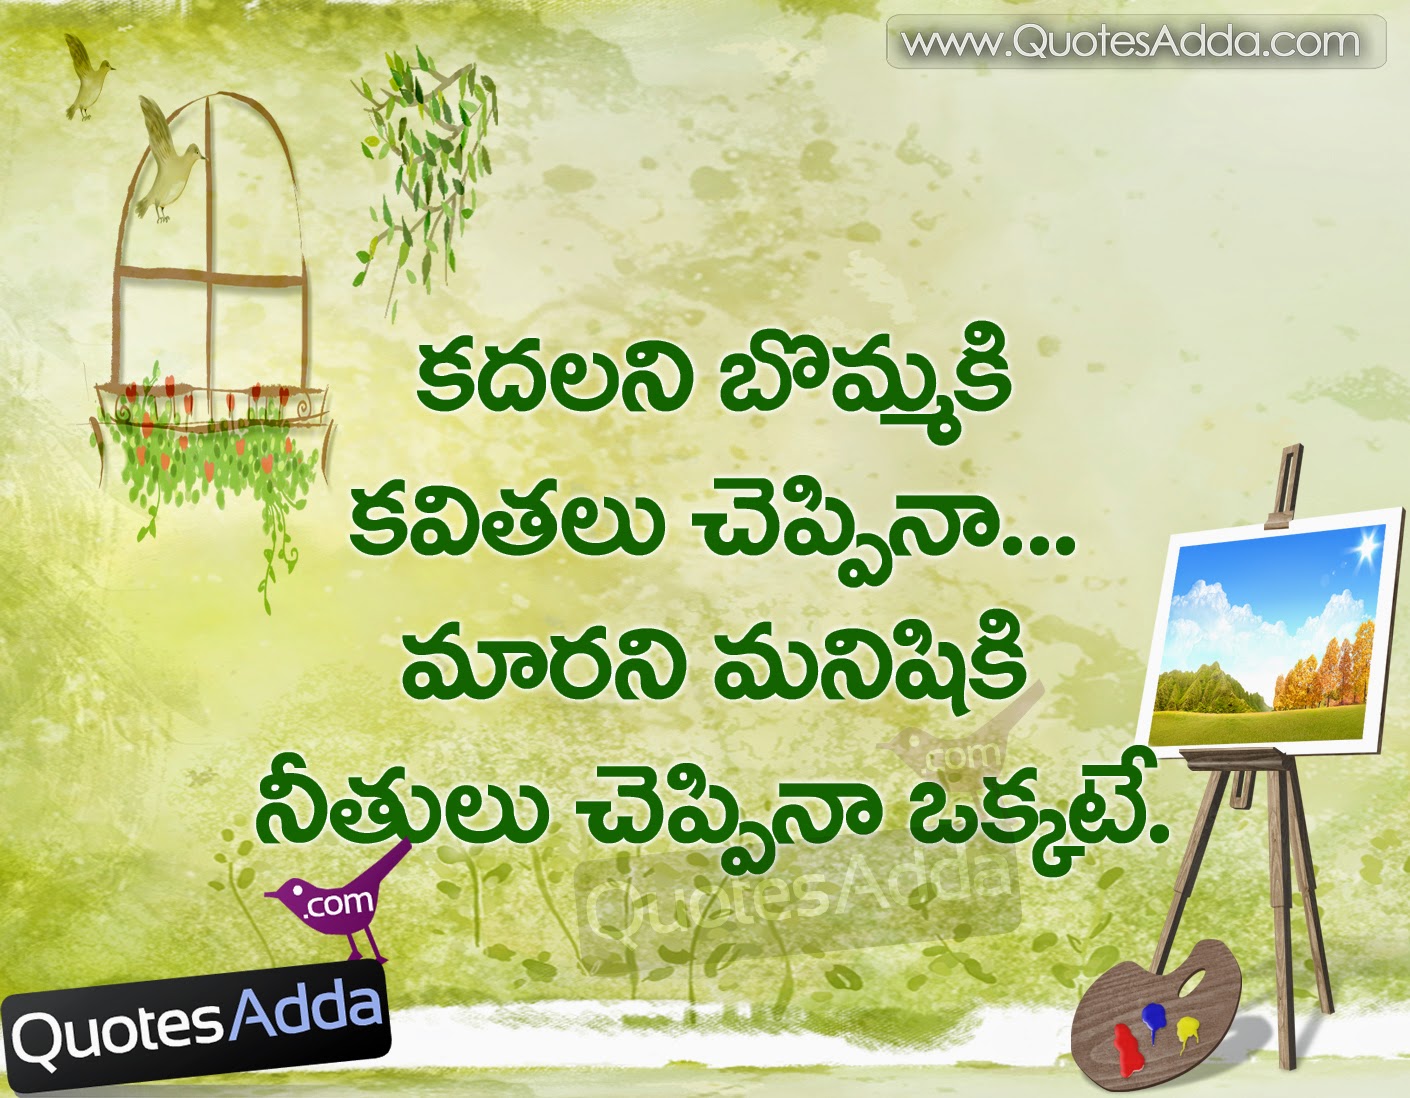 Image Result For Quotations Telugu And